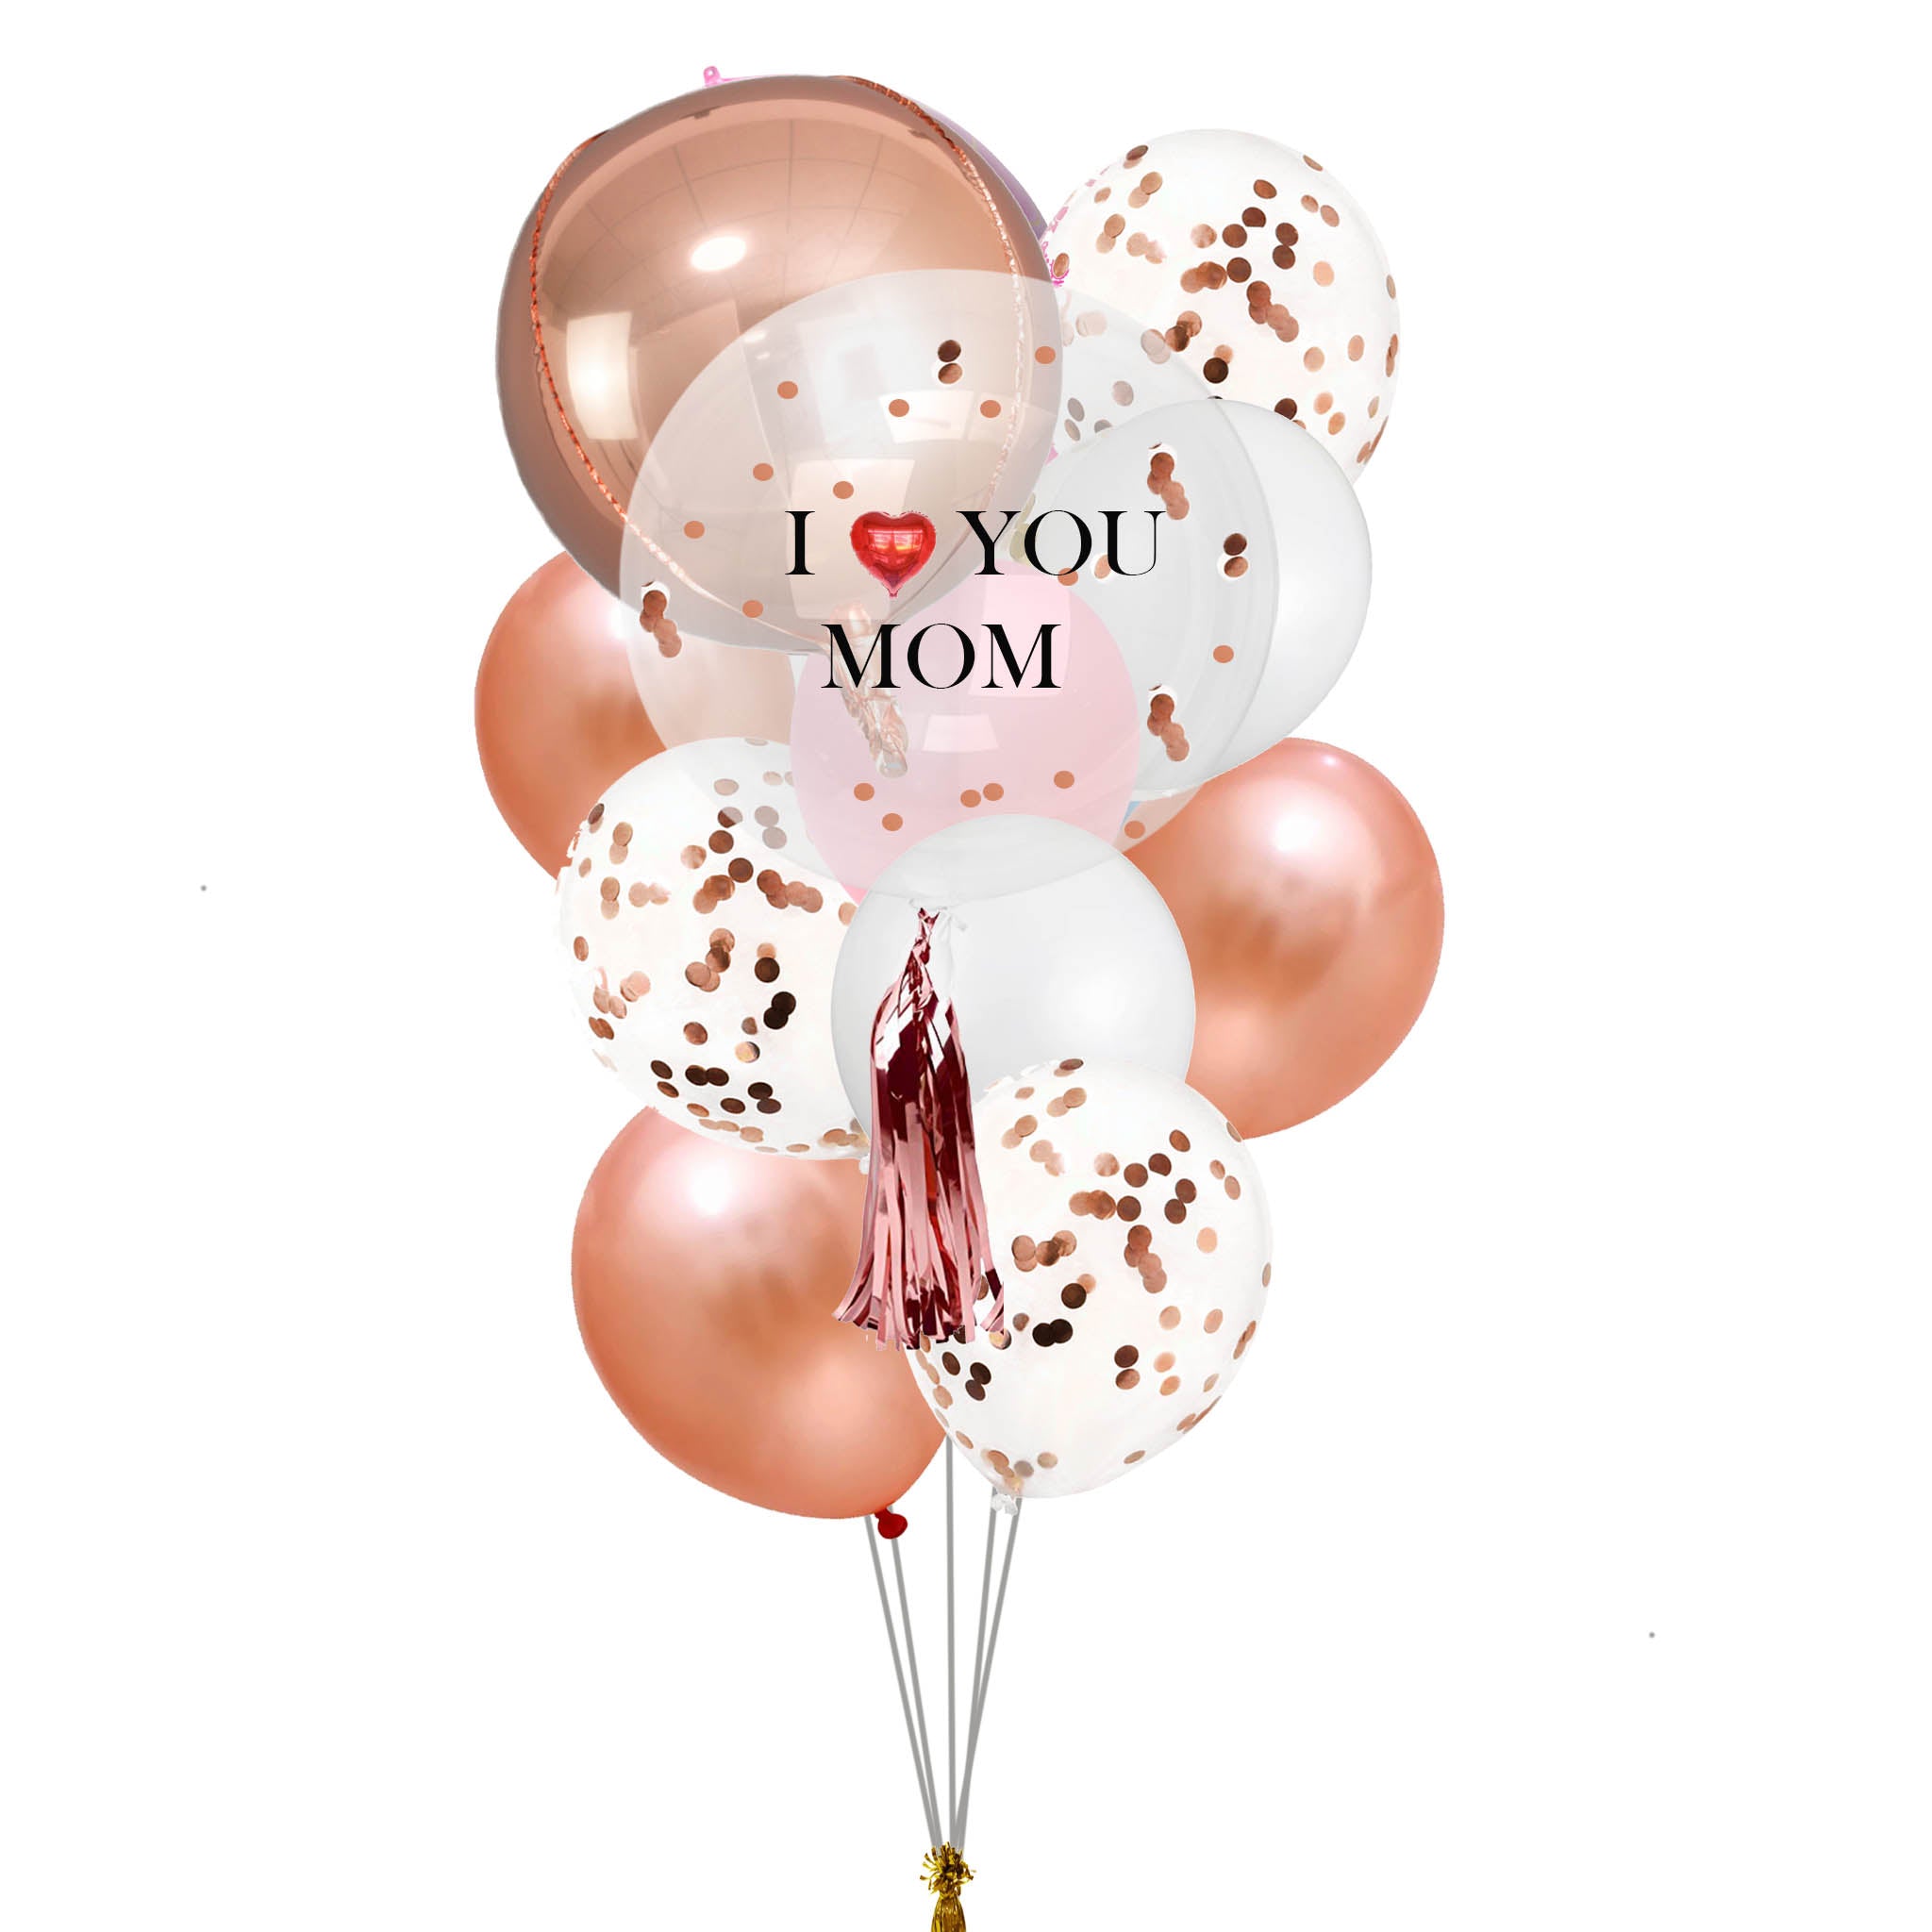 i love you mom customized balloons bouquet special gift delivery in Dubai